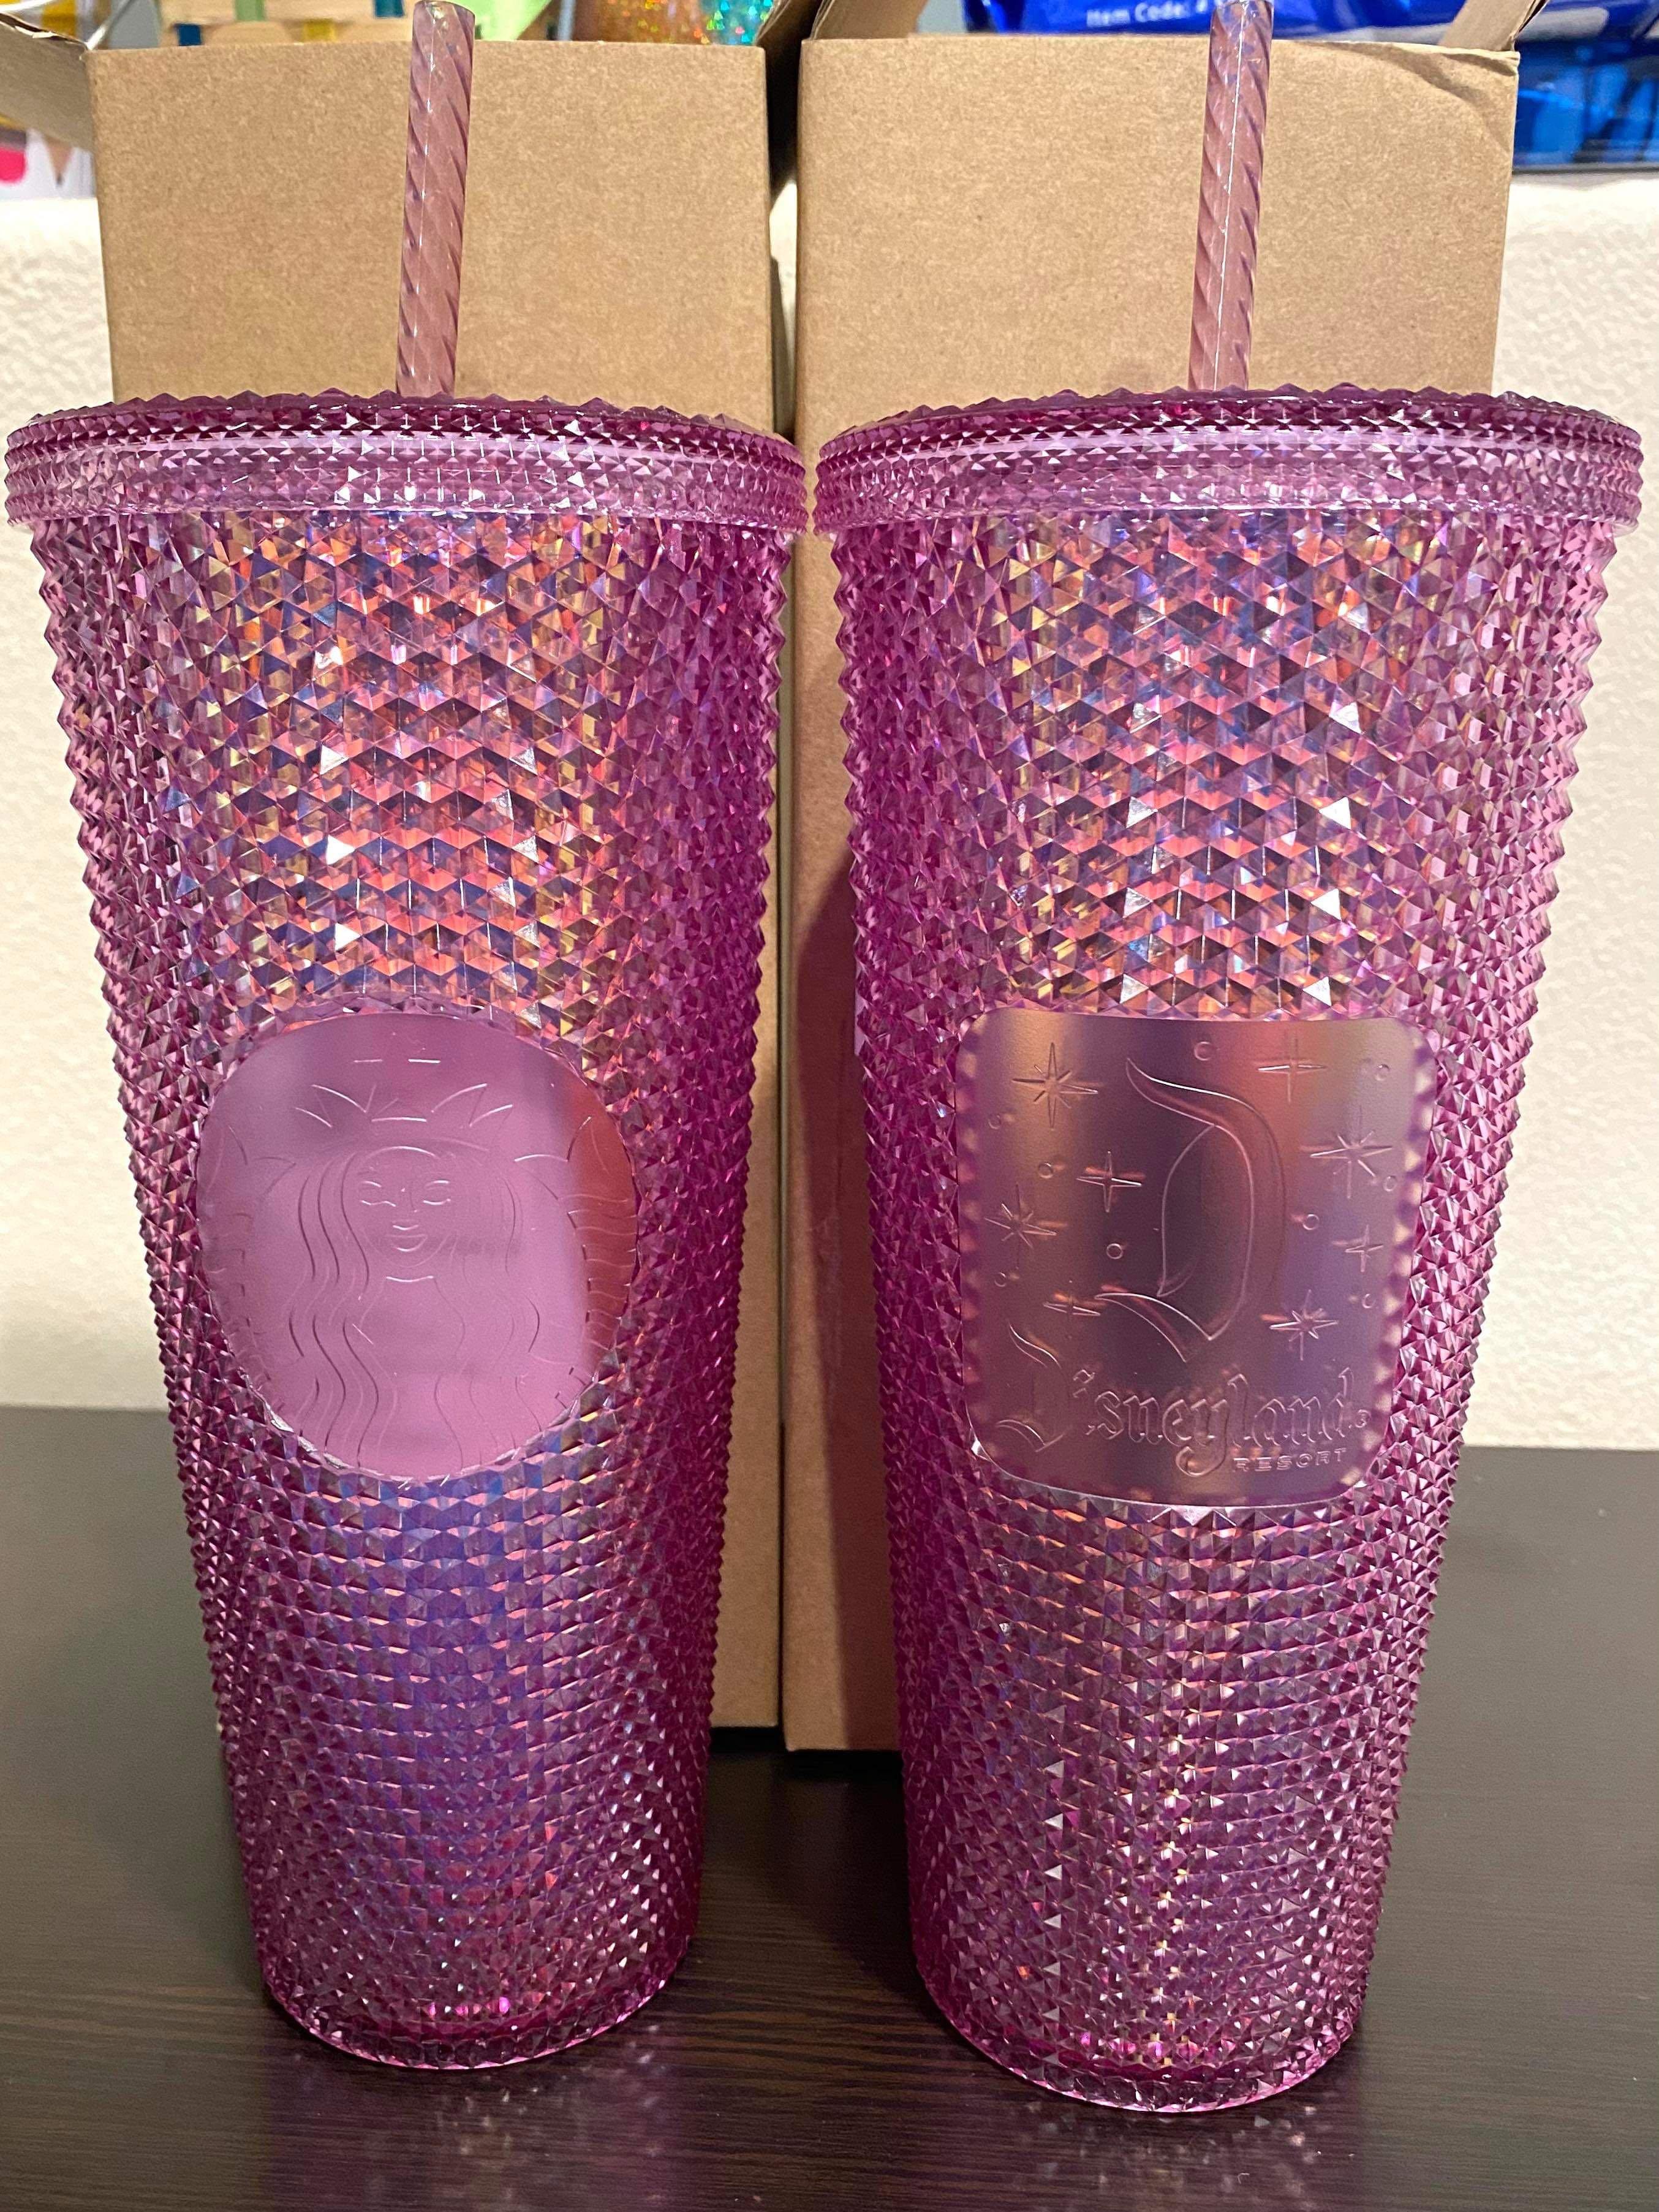 HURRY! Disneyland's Studded Starbucks Tumbler is Now Available Online! 